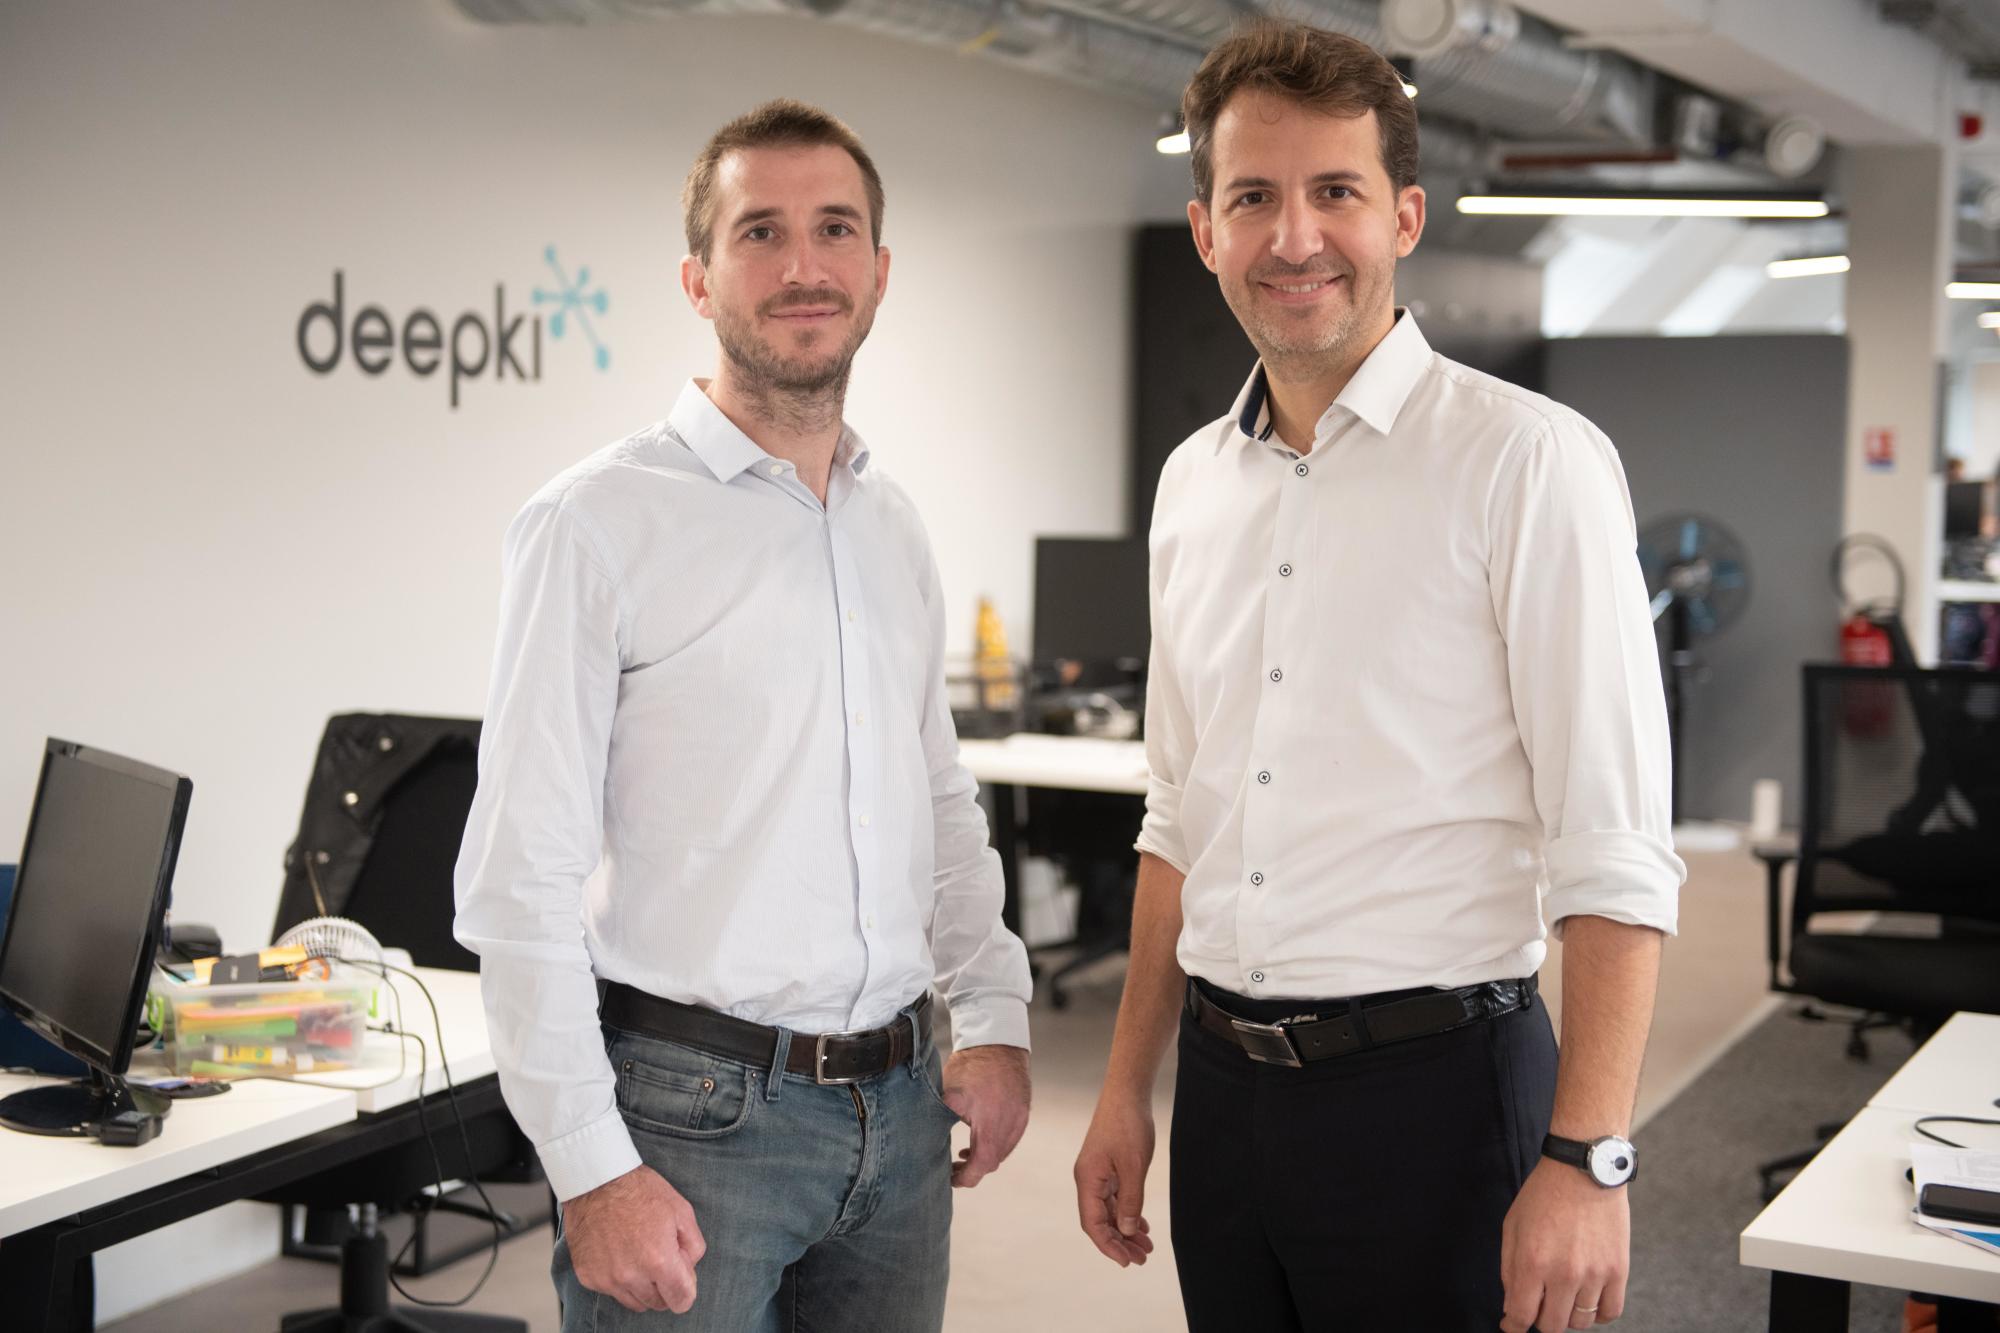 Deepki Achieves Highest-Ever ClimateTech SAAS Fundraising in the Real Estate Sector